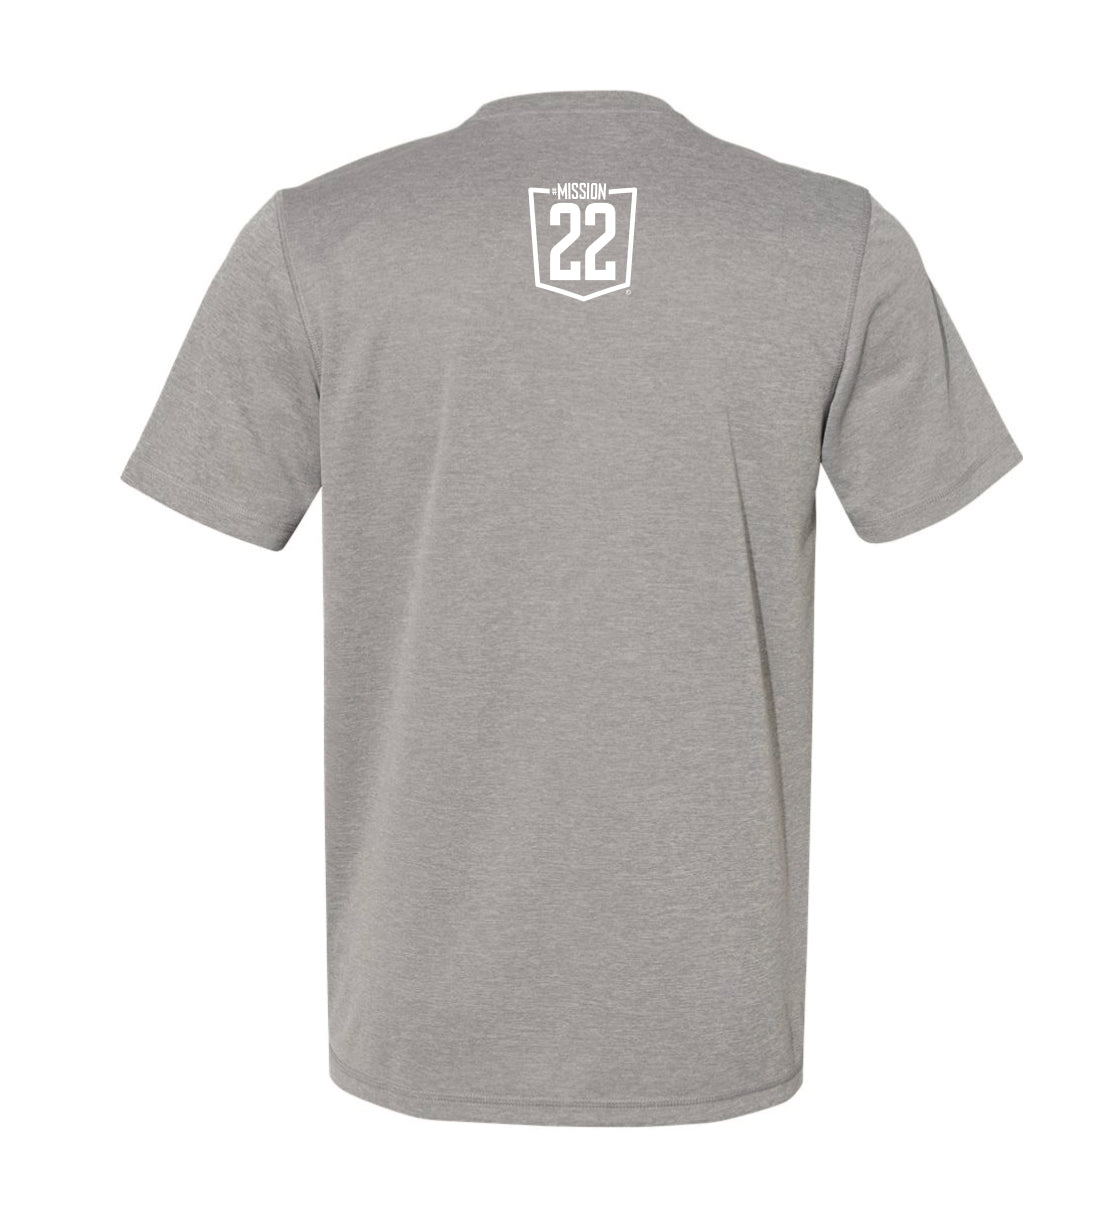 Product Image of Mission 22 Performance Tee #2